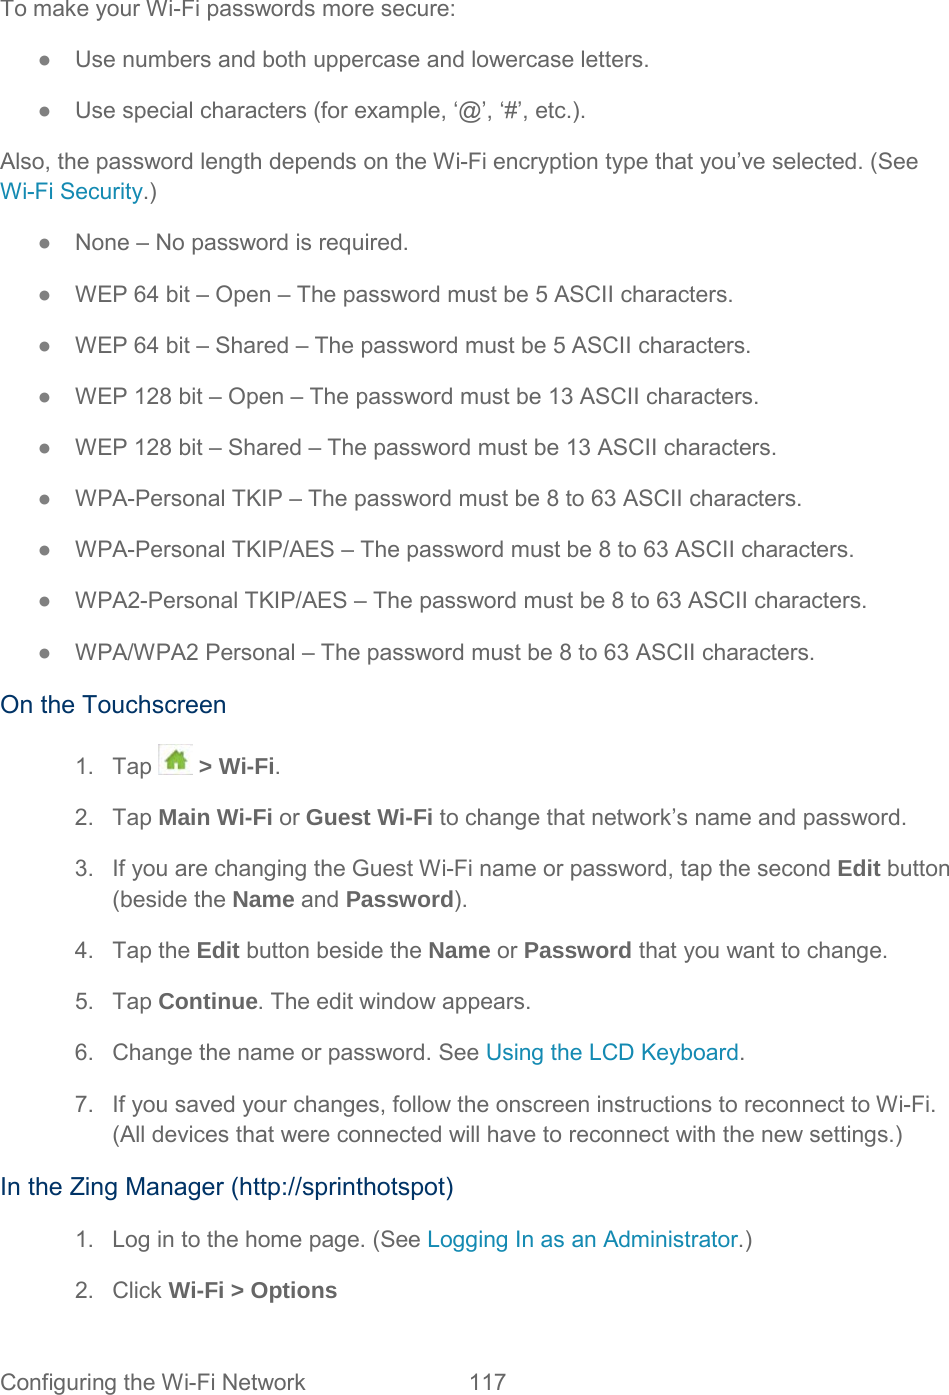 To make your Wi-Fi passwords more secure: ●  Use numbers and both uppercase and lowercase letters. ●  Use special characters (for example, ‘@’, ‘#’, etc.). Also, the password length depends on the Wi-Fi encryption type that you’ve selected. (See Wi-Fi Security.) ●  None – No password is required. ●  WEP 64 bit – Open – The password must be 5 ASCII characters. ●  WEP 64 bit – Shared – The password must be 5 ASCII characters. ●  WEP 128 bit – Open – The password must be 13 ASCII characters. ●  WEP 128 bit – Shared – The password must be 13 ASCII characters. ●  WPA-Personal TKIP – The password must be 8 to 63 ASCII characters. ●  WPA-Personal TKIP/AES – The password must be 8 to 63 ASCII characters. ●  WPA2-Personal TKIP/AES – The password must be 8 to 63 ASCII characters. ●  WPA/WPA2 Personal – The password must be 8 to 63 ASCII characters. On the Touchscreen 1. Tap  &gt; Wi-Fi. 2. Tap Main Wi-Fi or Guest Wi-Fi to change that network’s name and password. 3. If you are changing the Guest Wi-Fi name or password, tap the second Edit button (beside the Name and Password). 4. Tap the Edit button beside the Name or Password that you want to change. 5. Tap Continue. The edit window appears. 6. Change the name or password. See Using the LCD Keyboard. 7. If you saved your changes, follow the onscreen instructions to reconnect to Wi-Fi. (All devices that were connected will have to reconnect with the new settings.) In the Zing Manager (http://sprinthotspot) 1. Log in to the home page. (See Logging In as an Administrator.) 2. Click Wi-Fi &gt; Options Configuring the Wi-Fi Network 117   